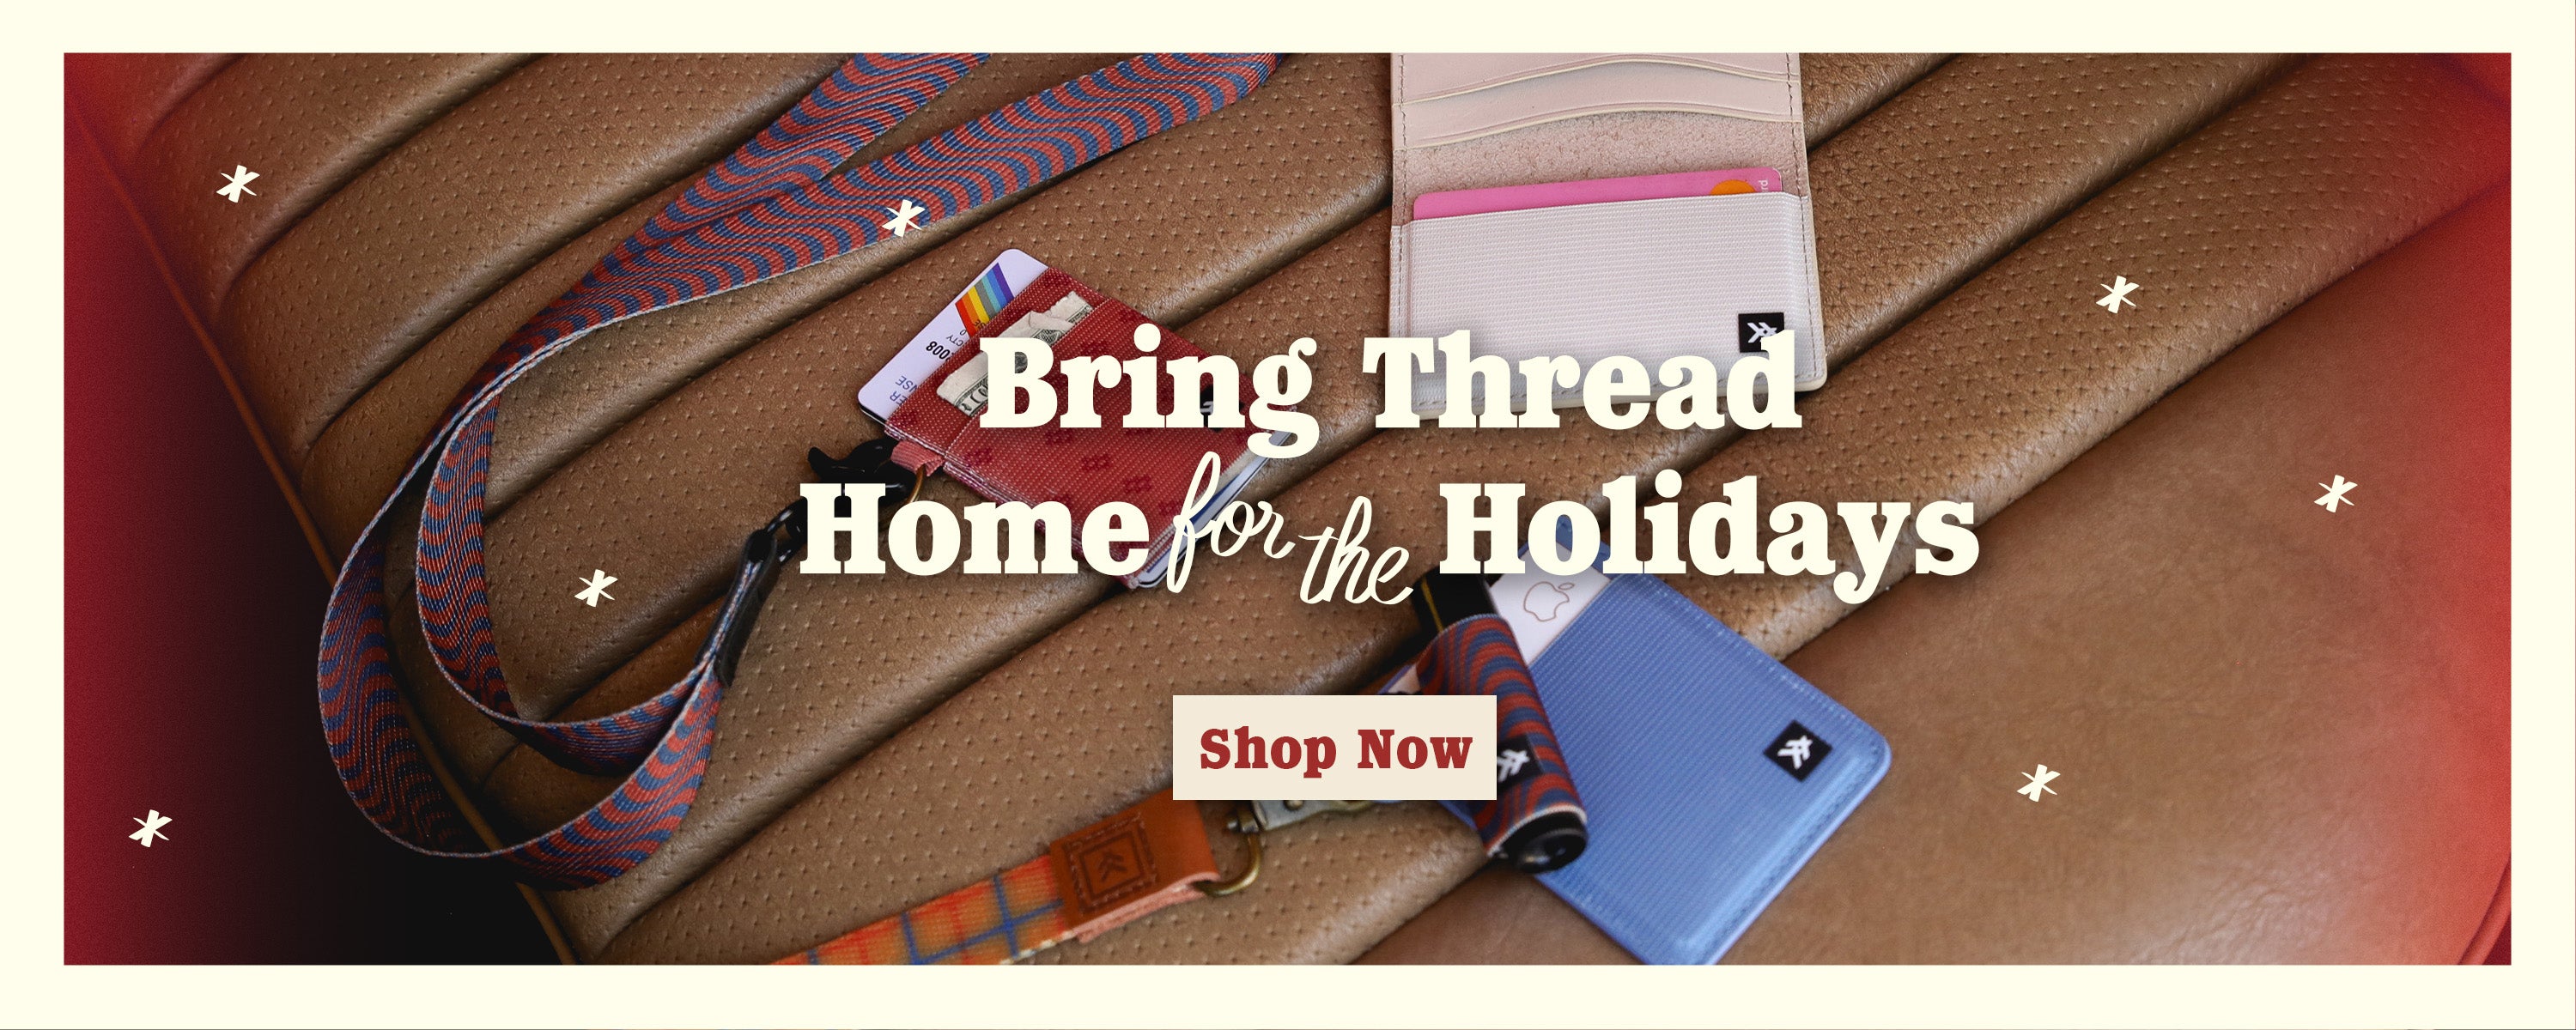 Bring Thread Home for the Holidays